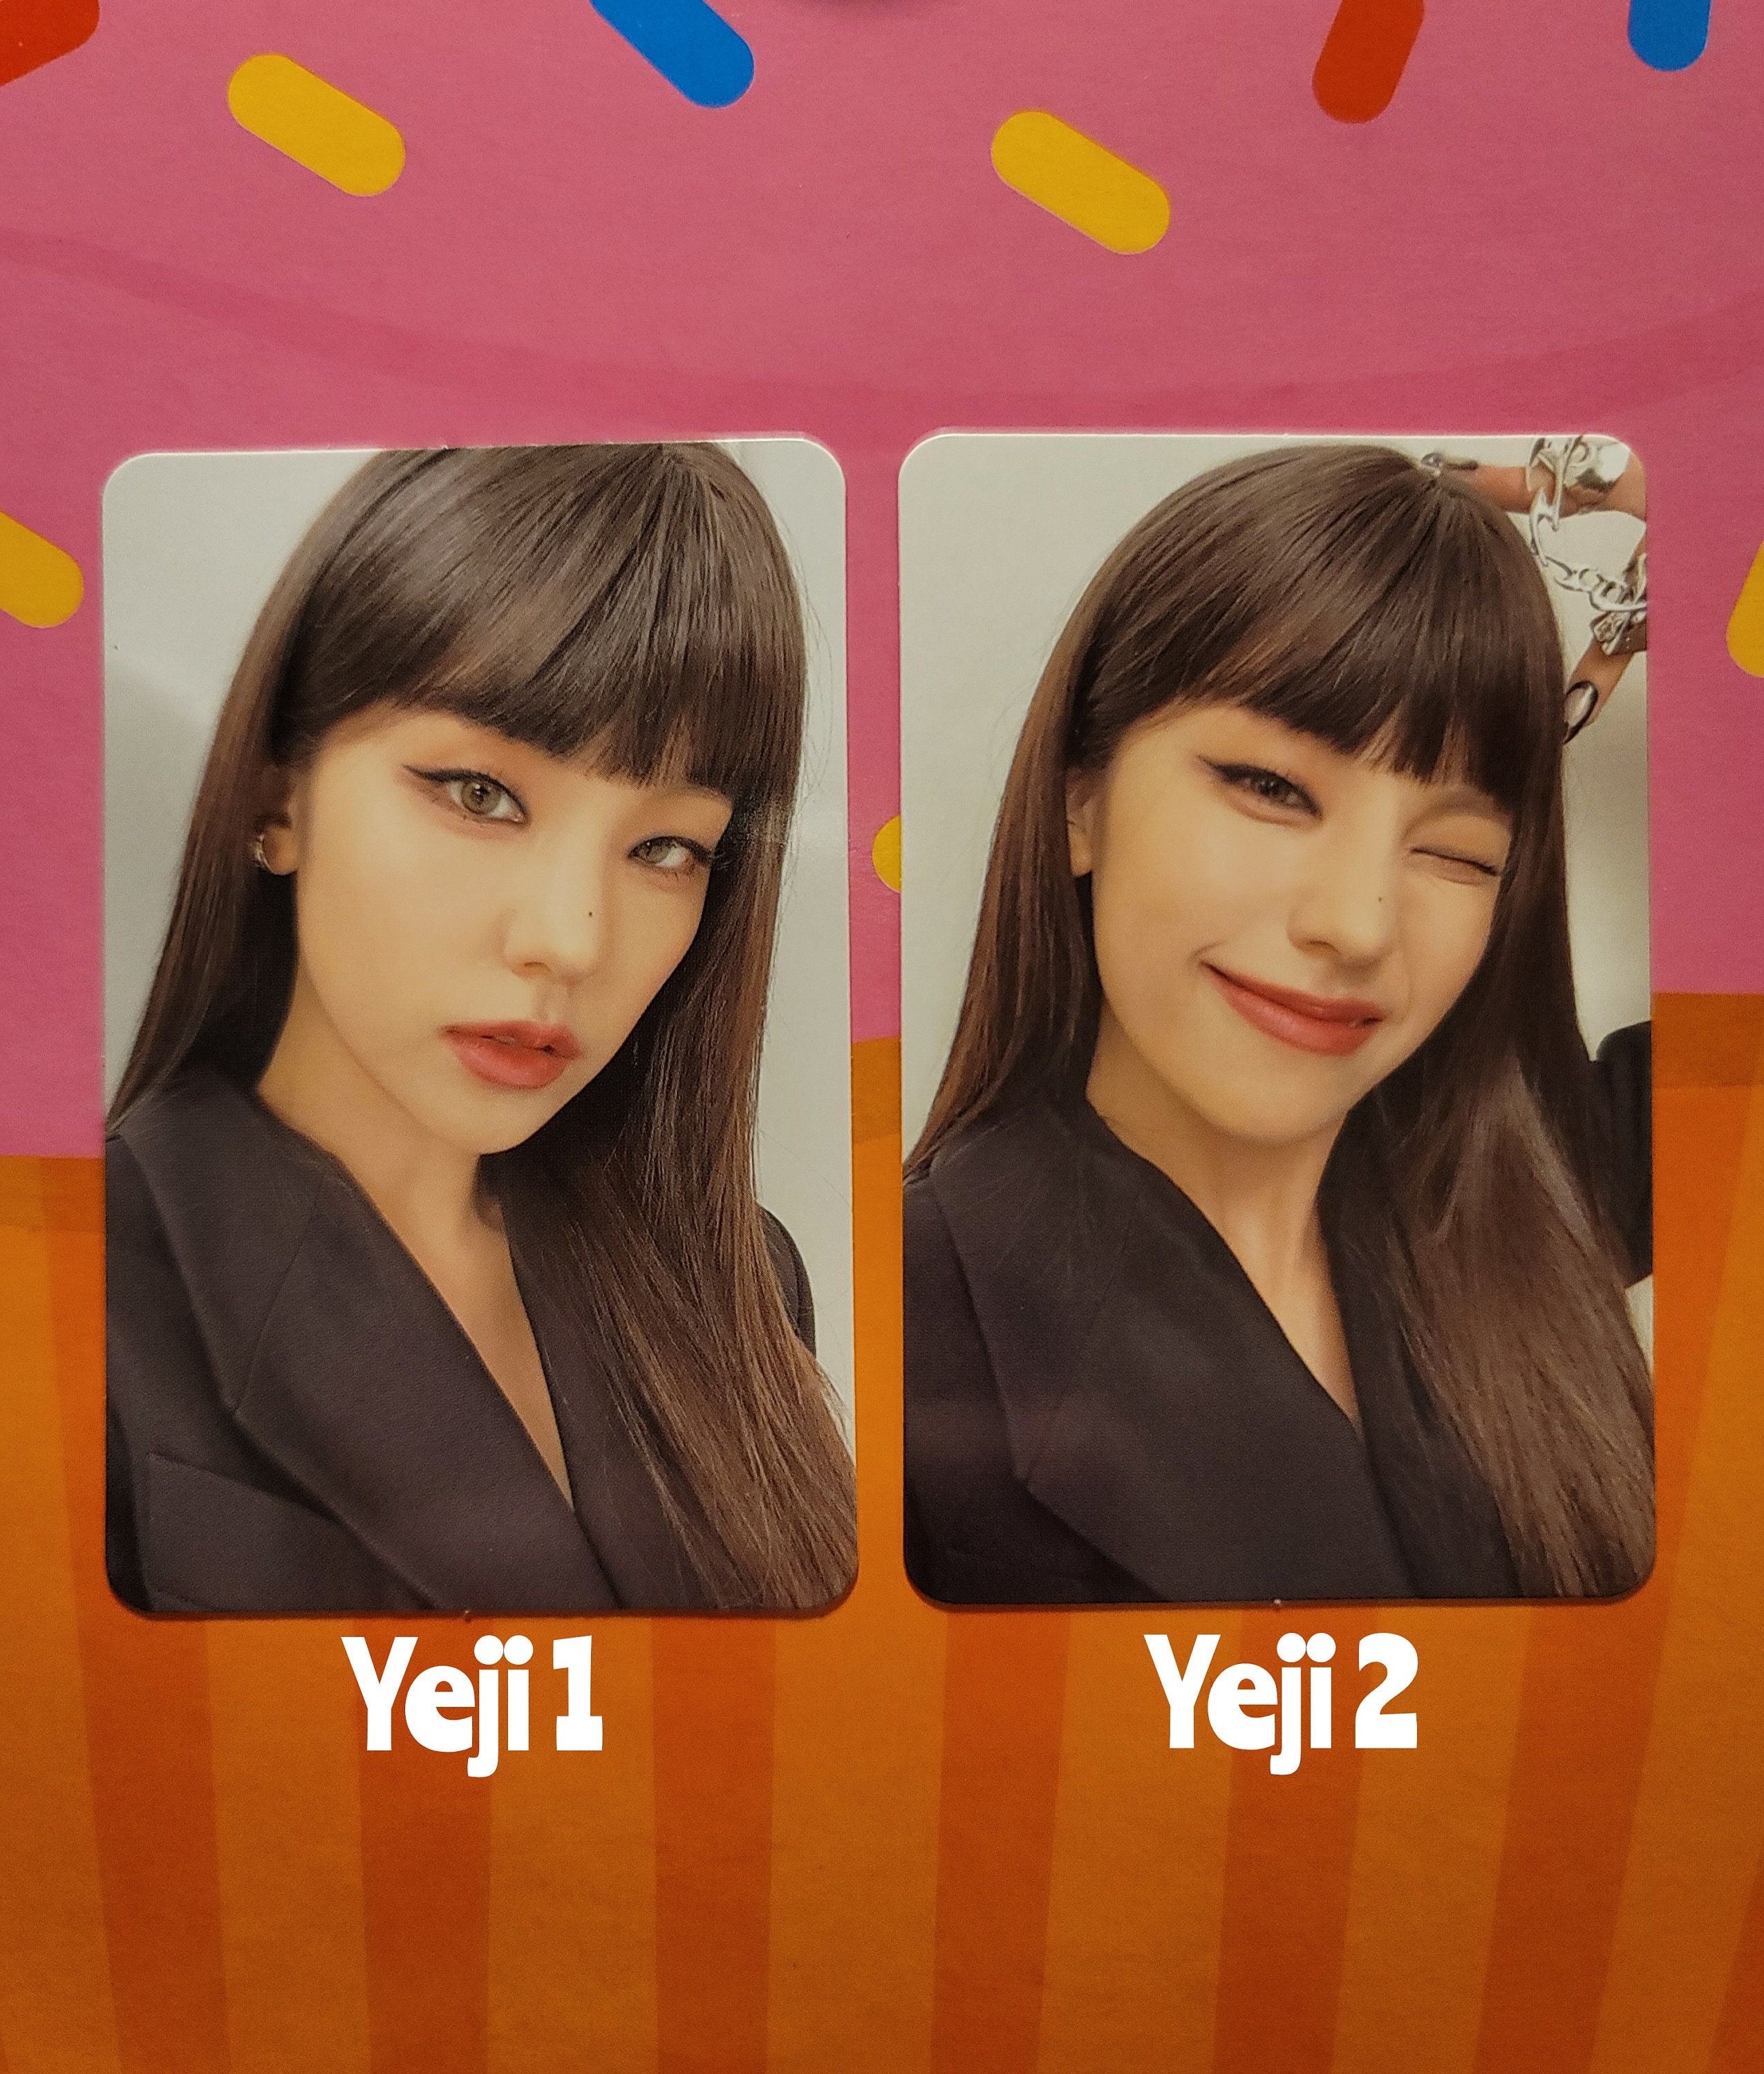  55pcs ITZY Photocards ITZY CHECKMATE new album